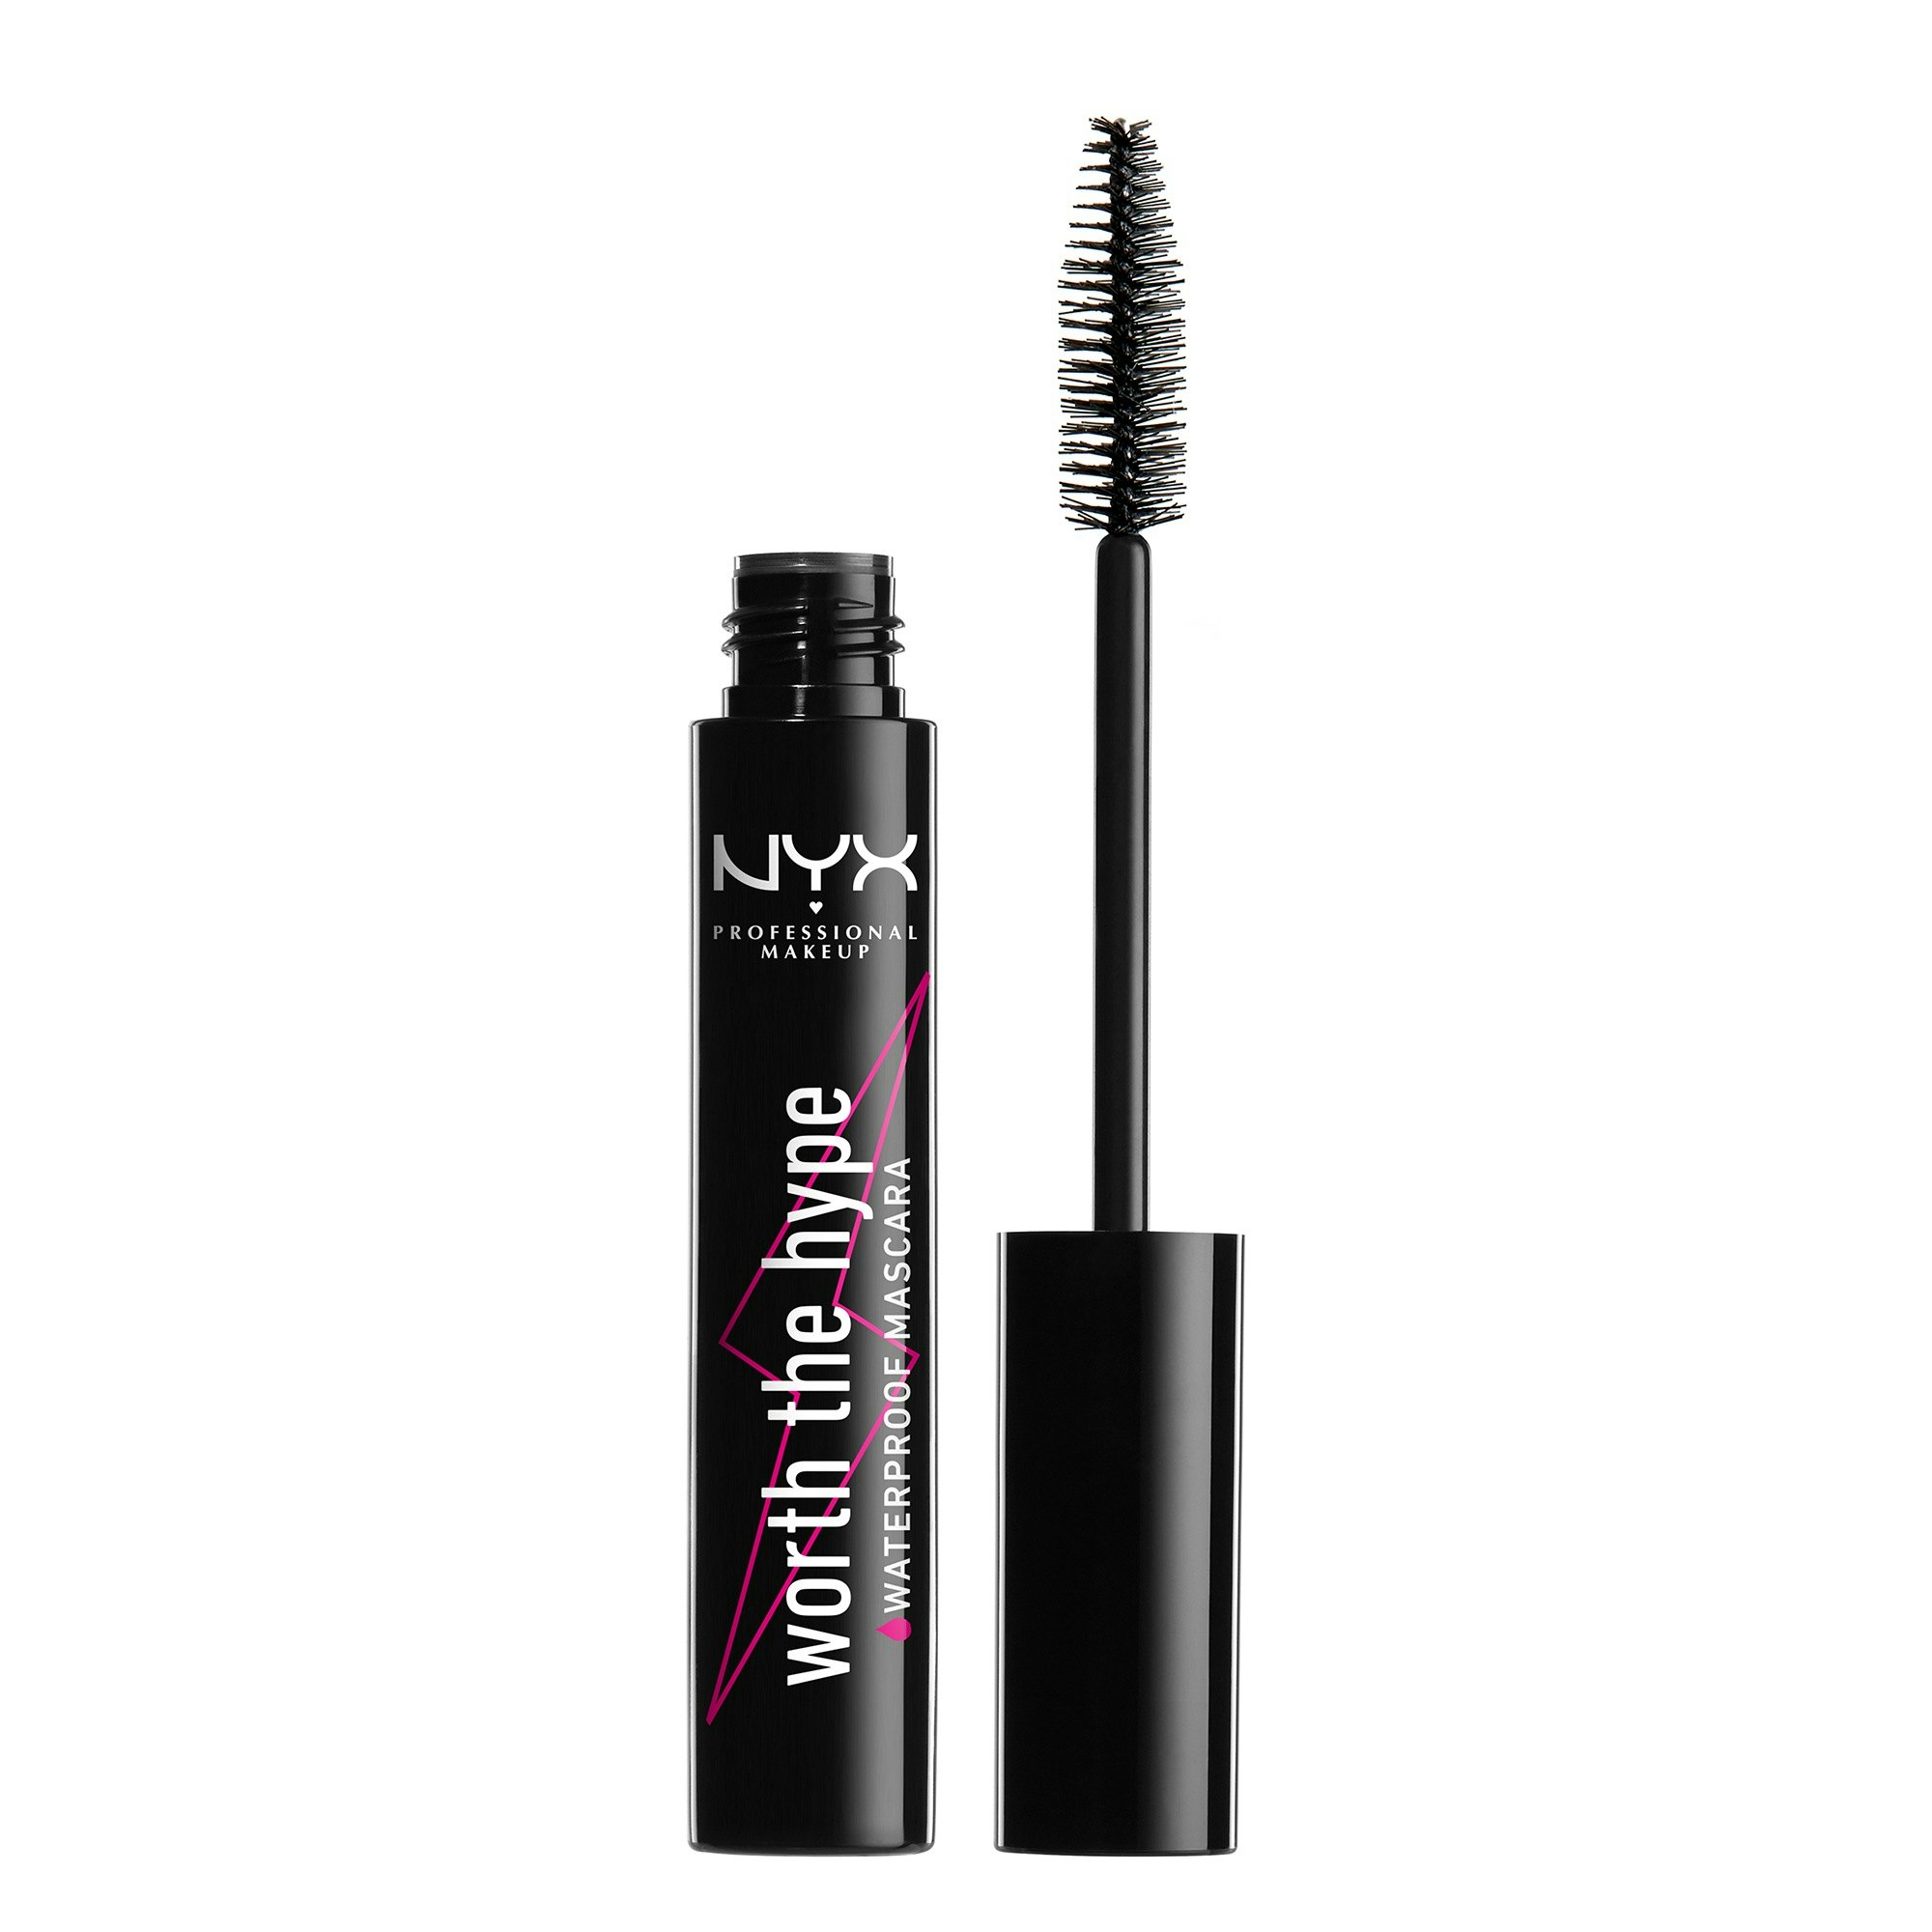 best selling mascara of all time